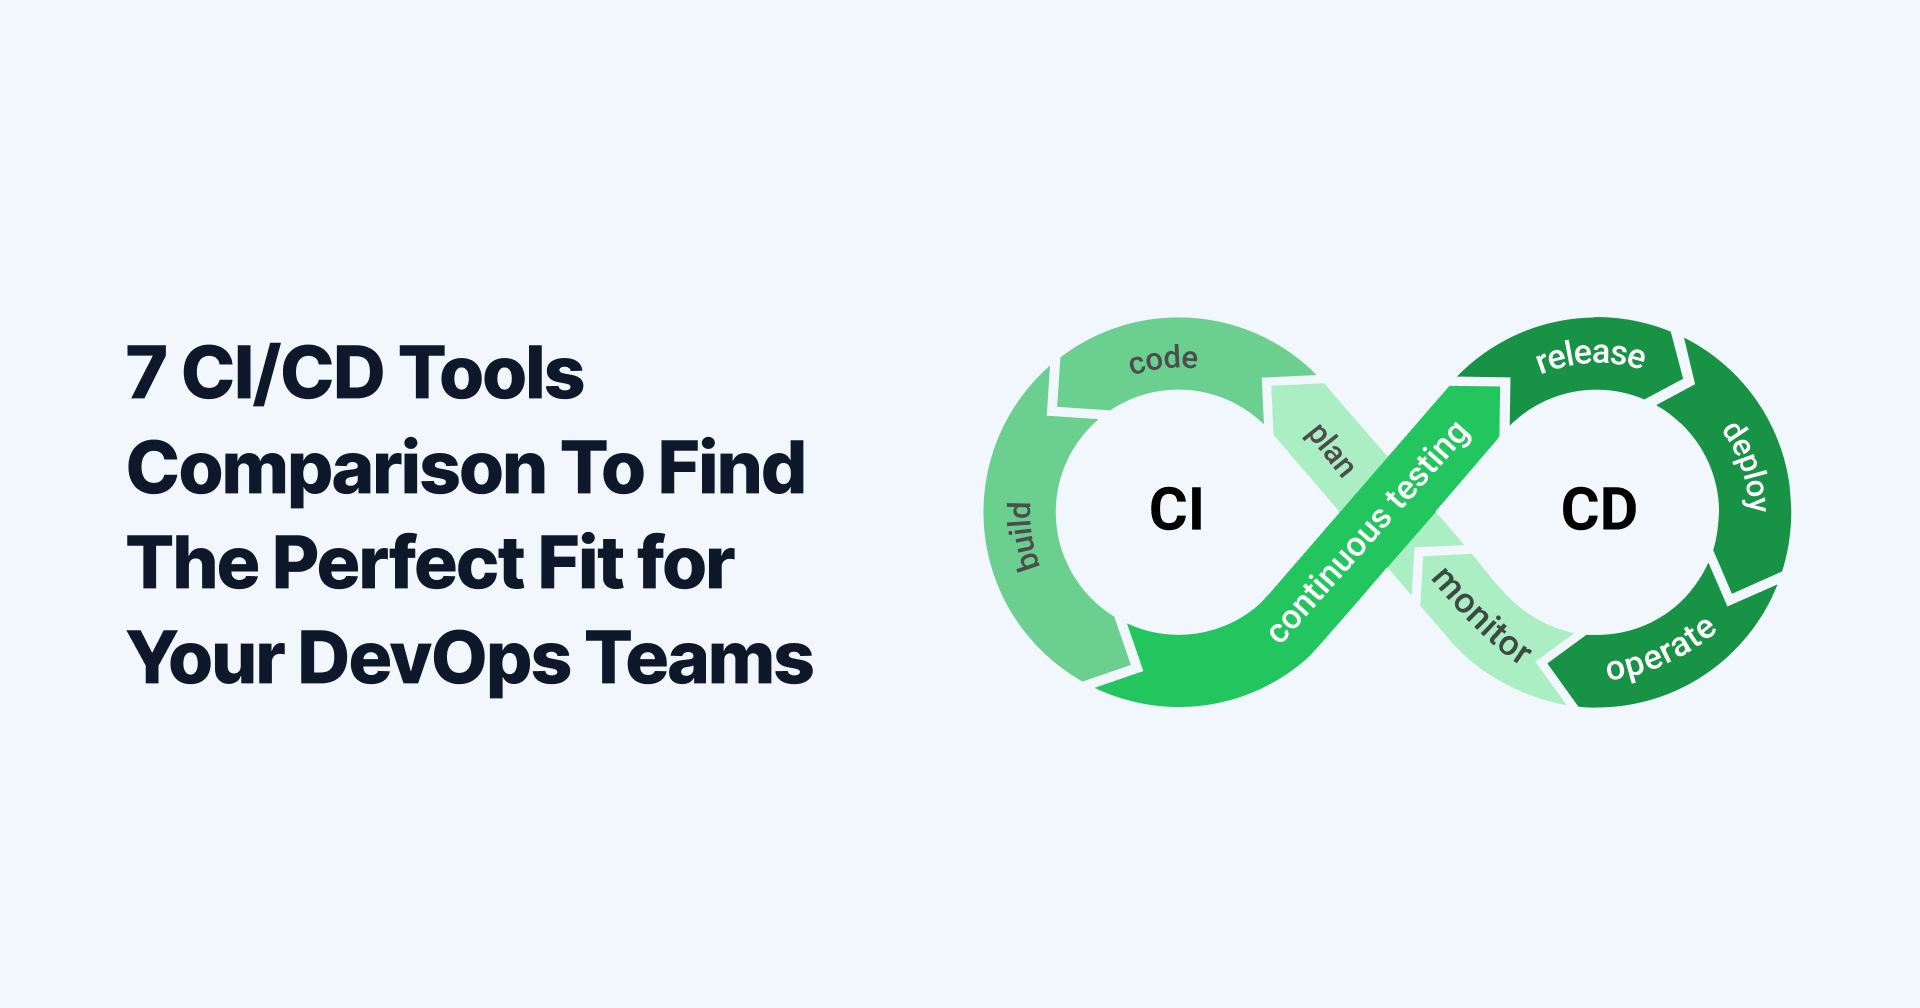 7 CI/CD Tools Comparison To Find The Perfect Fit for Your DevOps Teams